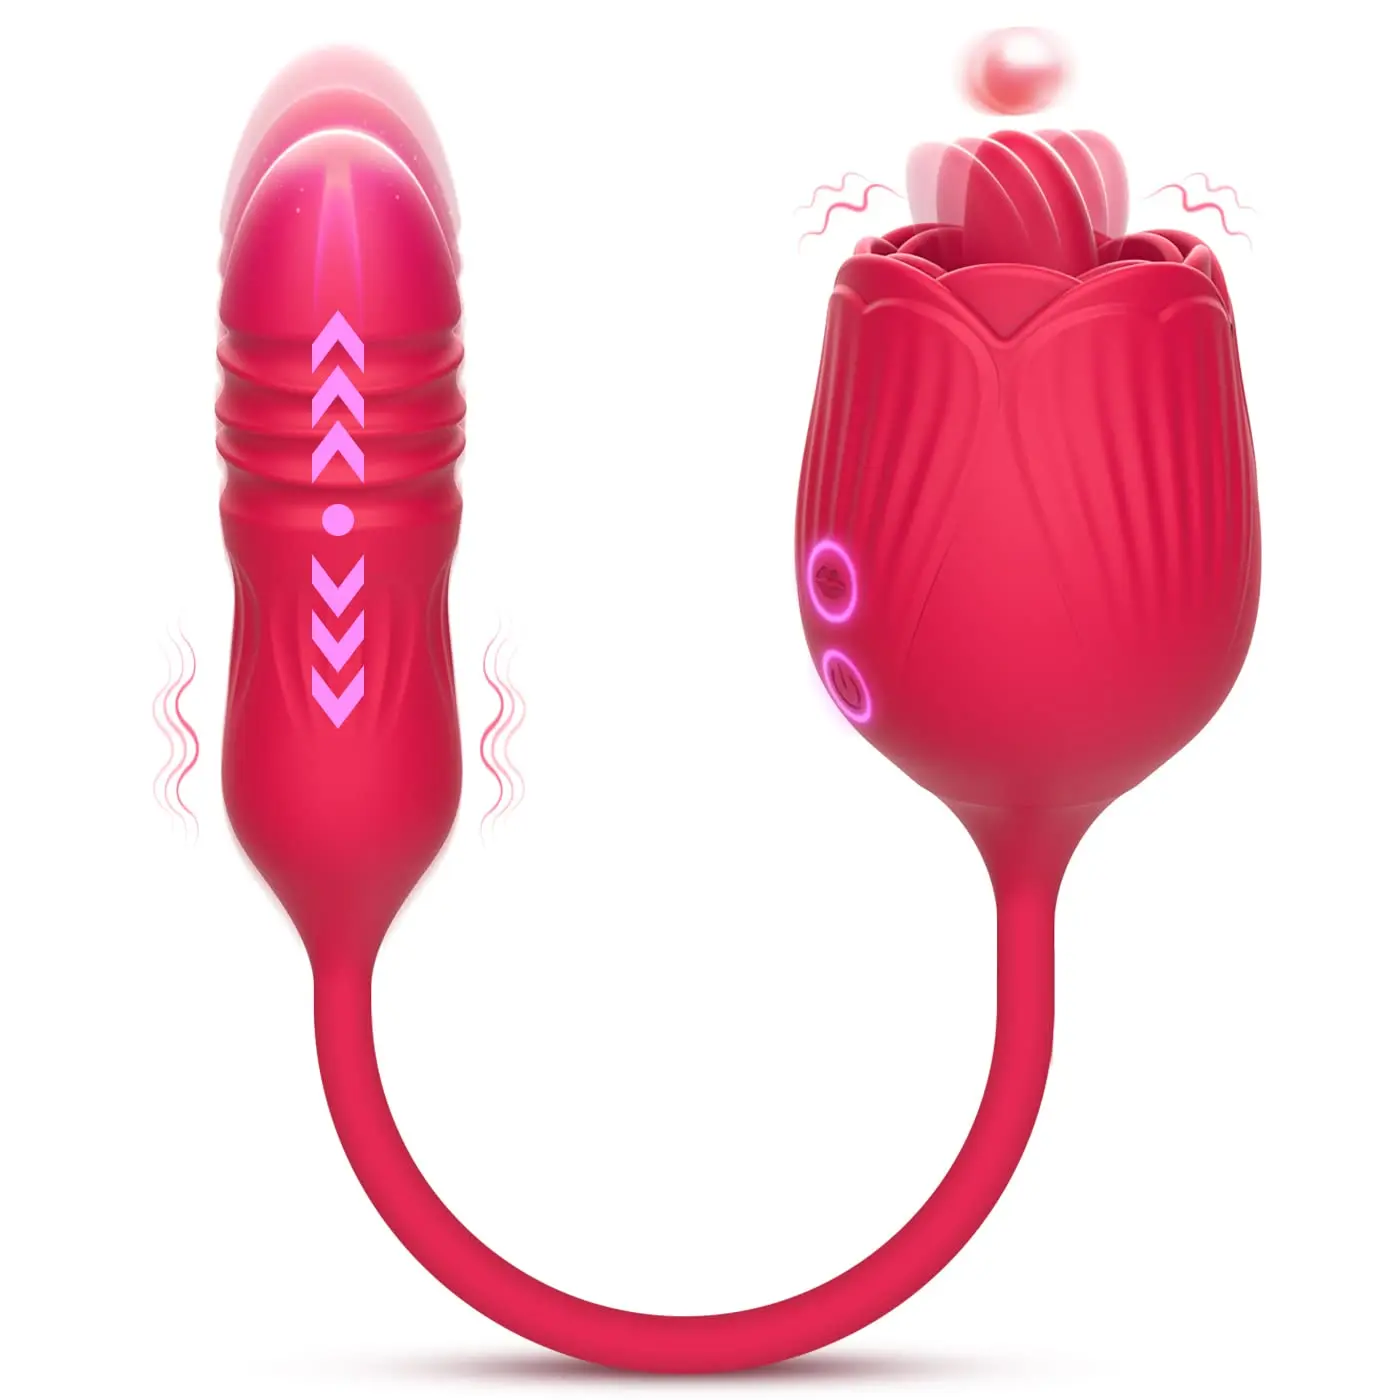 shade burn paper Rose Toy Vibrator For Women Clitoral Licking Stimulator Near Me Thrusting  Vibrating 4 In 1 Nipple Clitoris Anal Sex Toys Sexual - Buy Rose Toy  Vibrator,Thrusting Vibrating Rose,Rose Toy Near Me Product